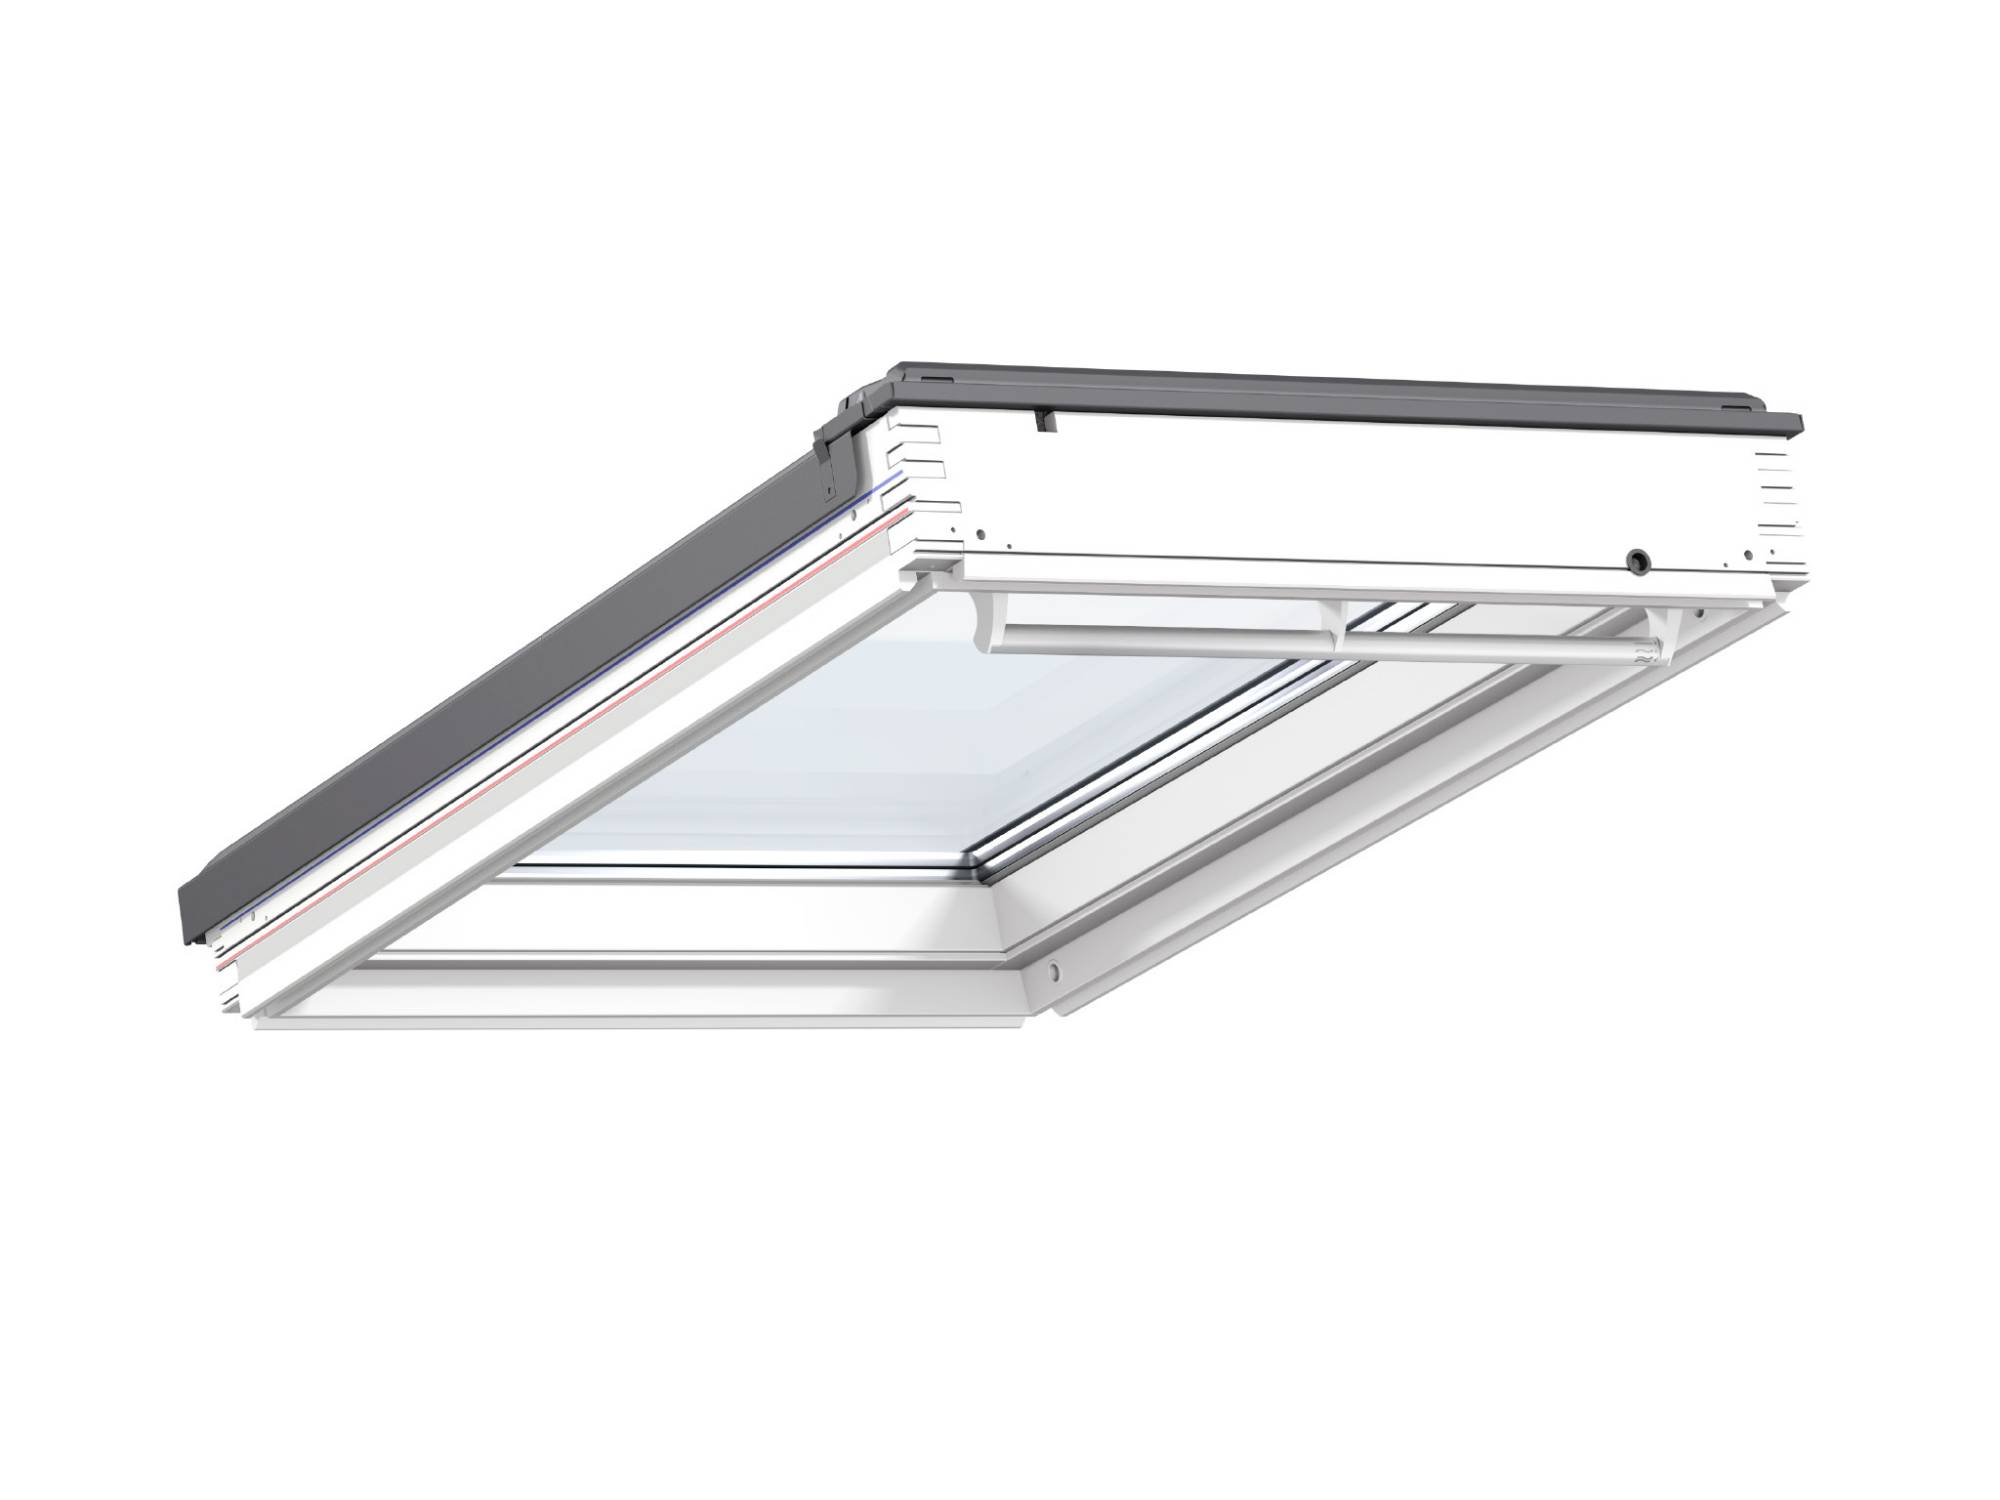 GBL Low Pitch, Centre-Pivot Roof Window